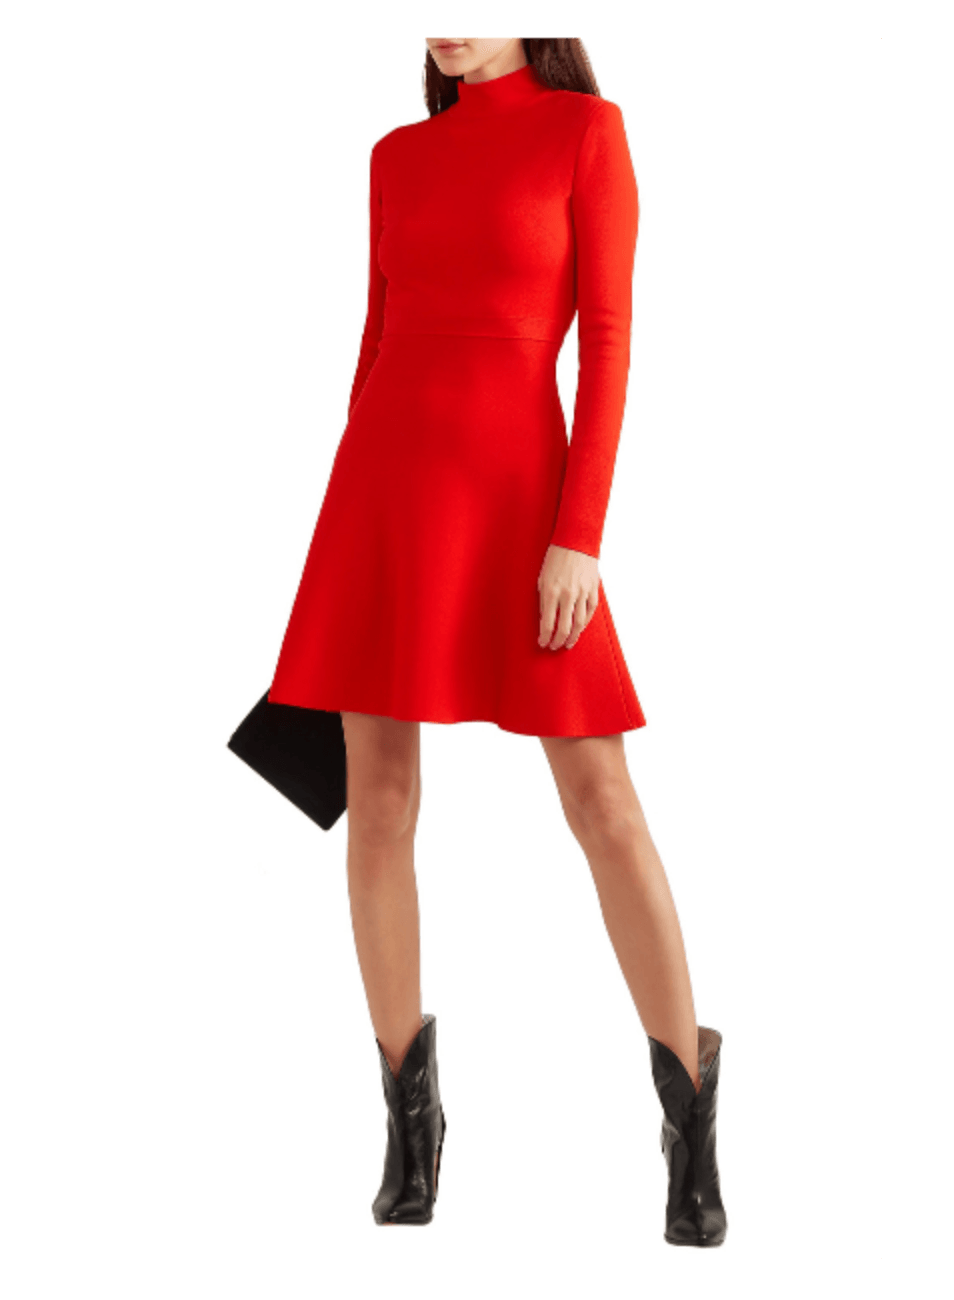 TWO-TONE MINIDRESS - RED AND BEIGE - codressing